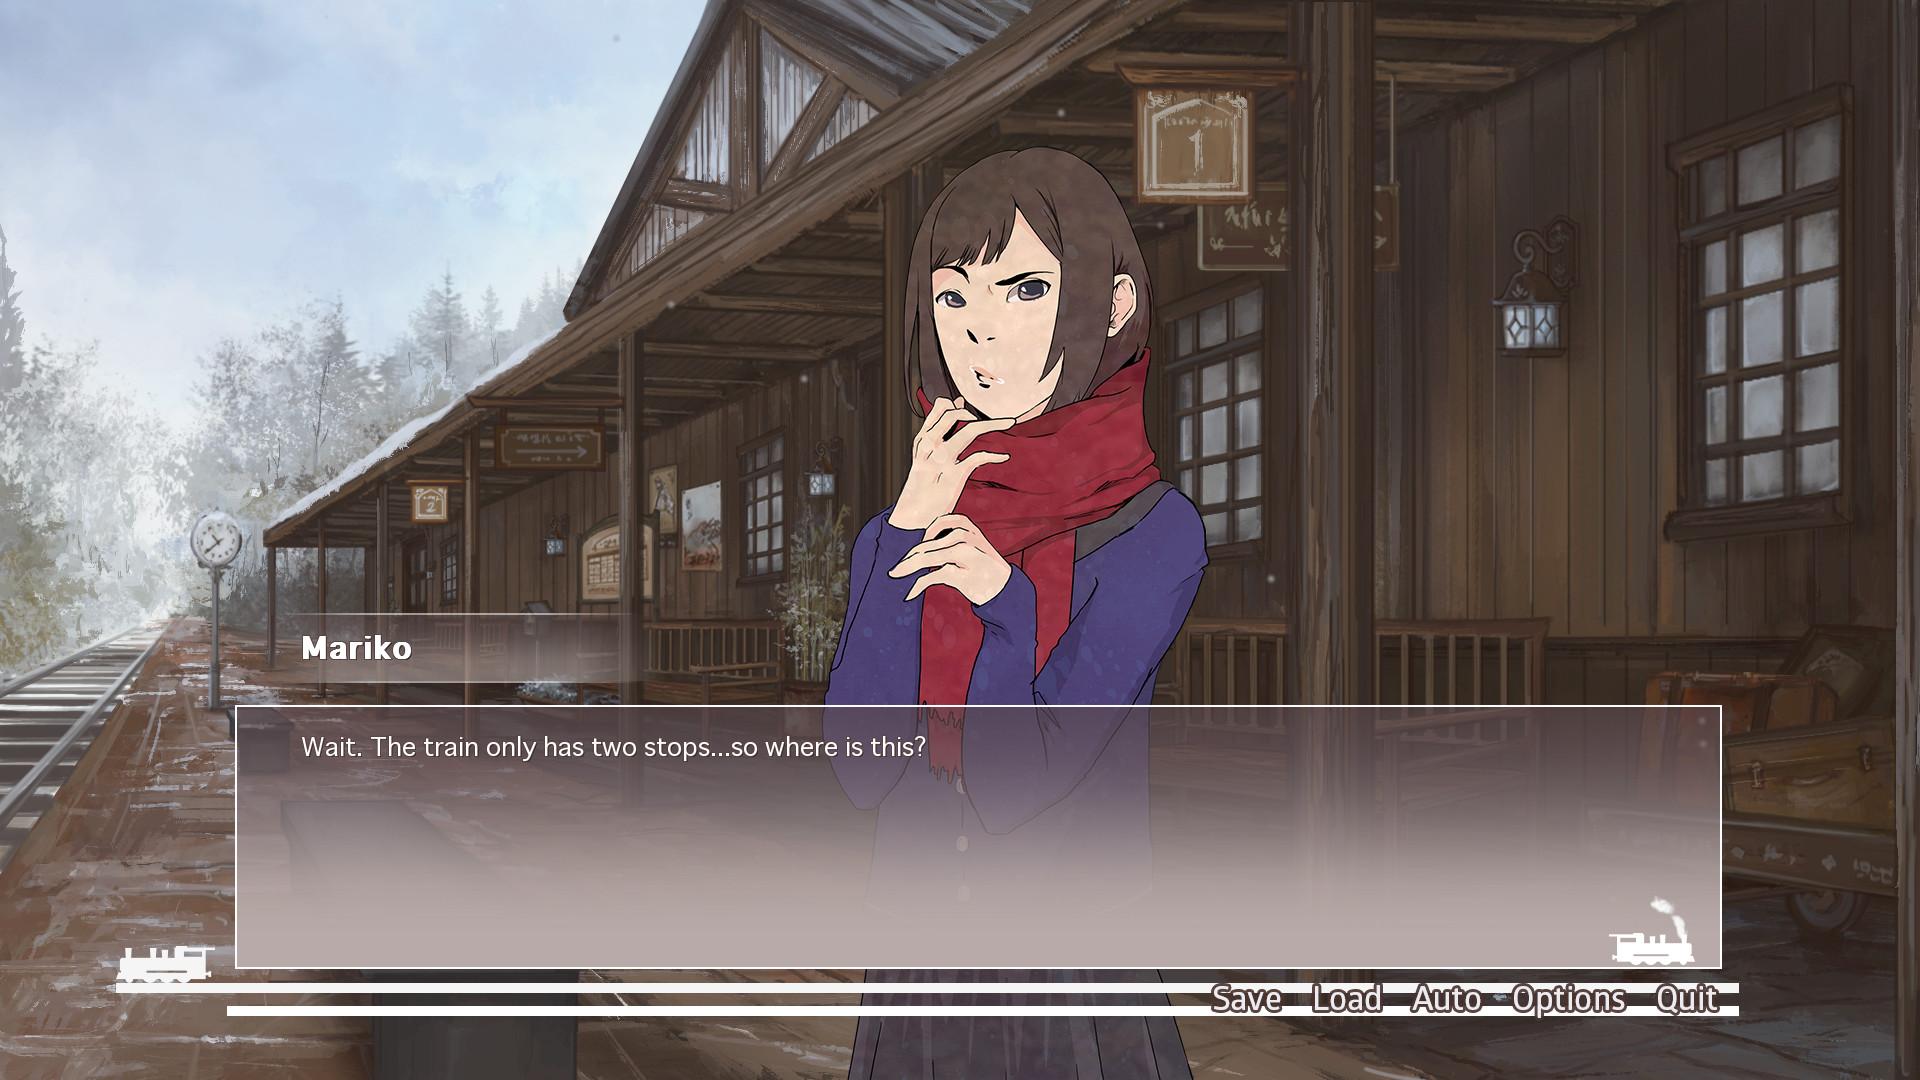 Screenshot №4 from game When Our Journey Ends - A Visual Novel